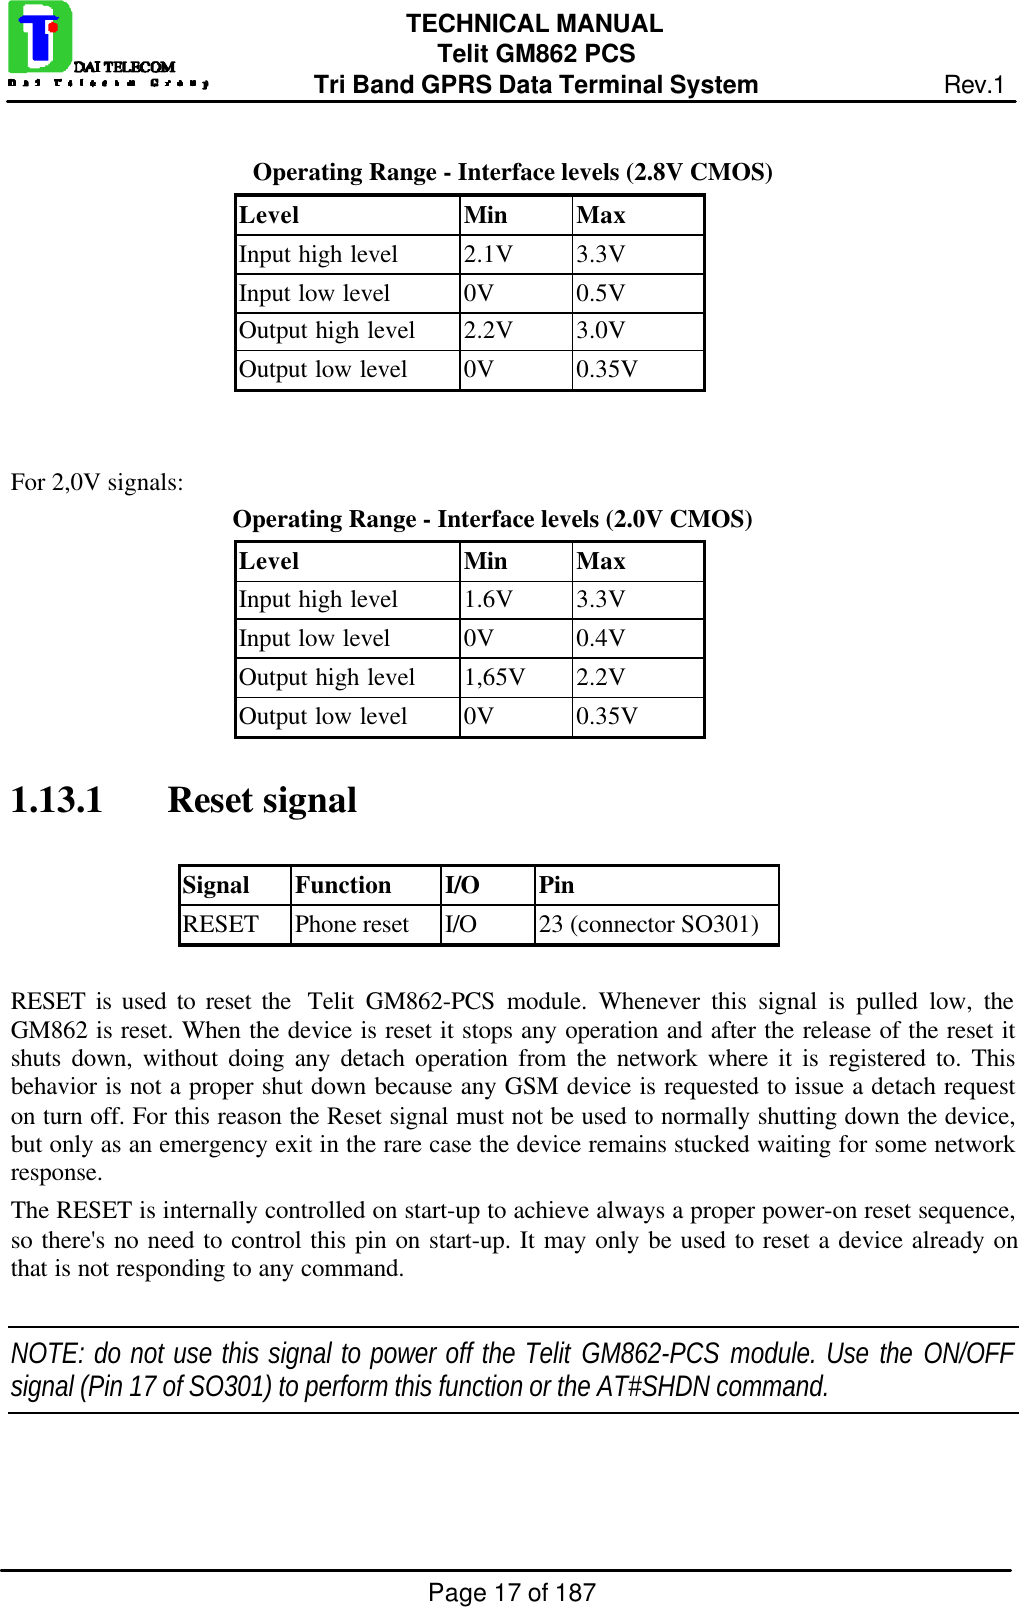 Page 17 of 187TECHNICAL MANUALTelit GM862 PCSTri Band GPRS Data Terminal System Rev.1Operating Range - Interface levels (2.8V CMOS)Level Min MaxInput high level 2.1V 3.3VInput low level 0V 0.5VOutput high level 2.2V 3.0VOutput low level 0V 0.35VFor 2,0V signals:Operating Range - Interface levels (2.0V CMOS)Level Min MaxInput high level 1.6V 3.3VInput low level 0V 0.4VOutput high level 1,65V 2.2VOutput low level 0V 0.35V1.13.1  Reset signalSignal Function I/O PinRESET Phone reset I/O 23 (connector SO301)RESET is used to reset the  Telit GM862-PCS module. Whenever this signal is pulled low, theGM862 is reset. When the device is reset it stops any operation and after the release of the reset itshuts down, without doing any detach operation from the network where it is registered to. Thisbehavior is not a proper shut down because any GSM device is requested to issue a detach requeston turn off. For this reason the Reset signal must not be used to normally shutting down the device,but only as an emergency exit in the rare case the device remains stucked waiting for some networkresponse.The RESET is internally controlled on start-up to achieve always a proper power-on reset sequence,so there&apos;s no need to control this pin on start-up. It may only be used to reset a device already onthat is not responding to any command.NOTE: do not use this signal to power off the Telit GM862-PCS module. Use the ON/OFFsignal (Pin 17 of SO301) to perform this function or the AT#SHDN command.